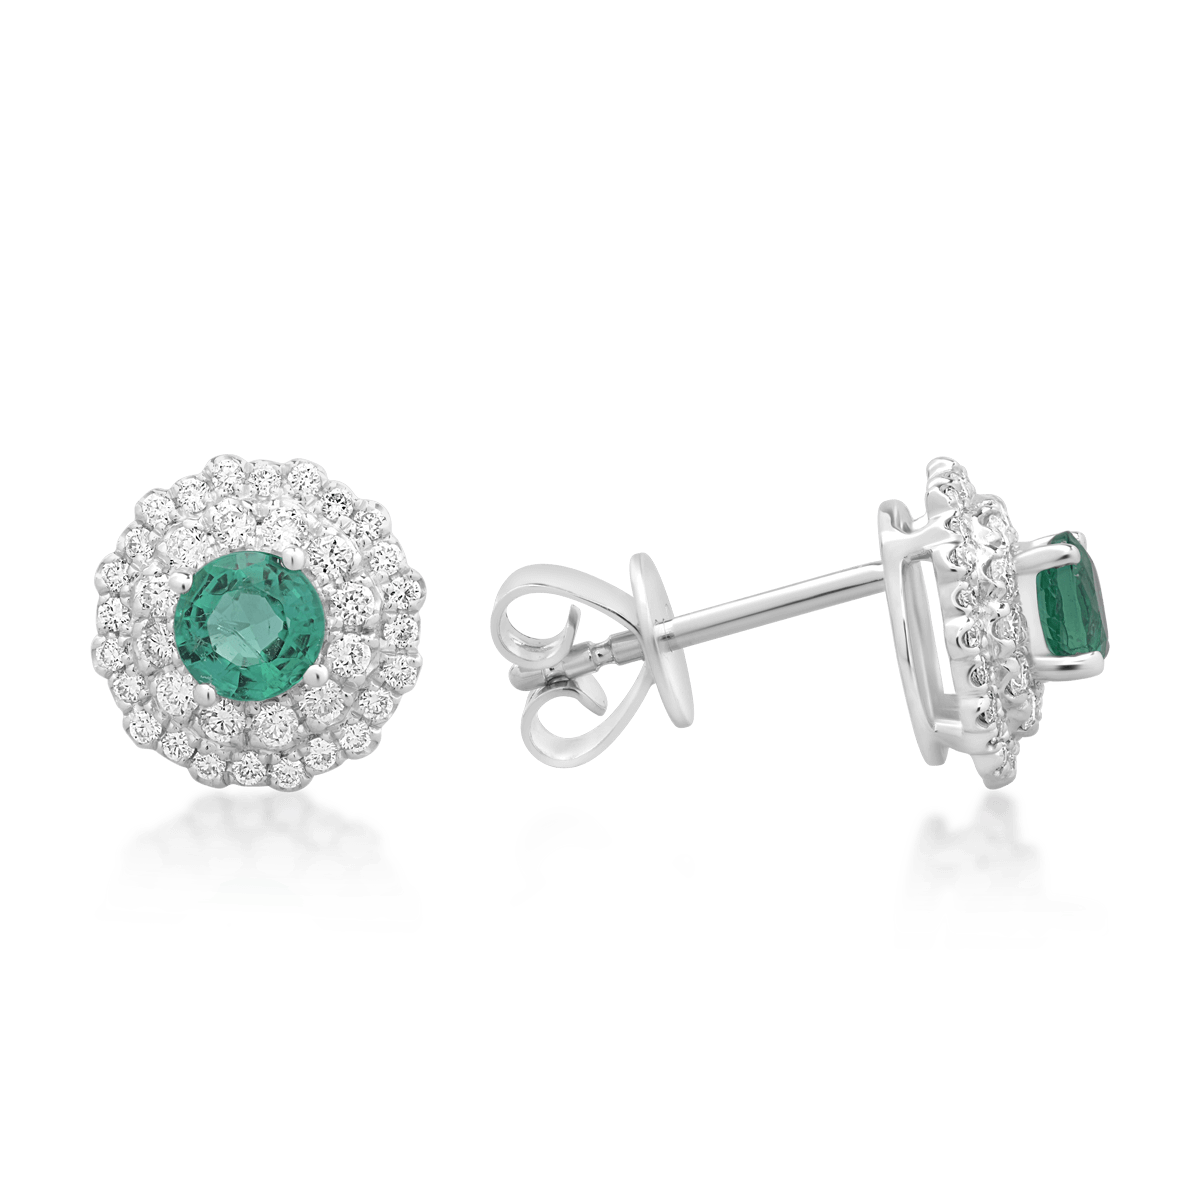 18K white gold earrings with 0.45ct emeralds and 0.34ct diamonds